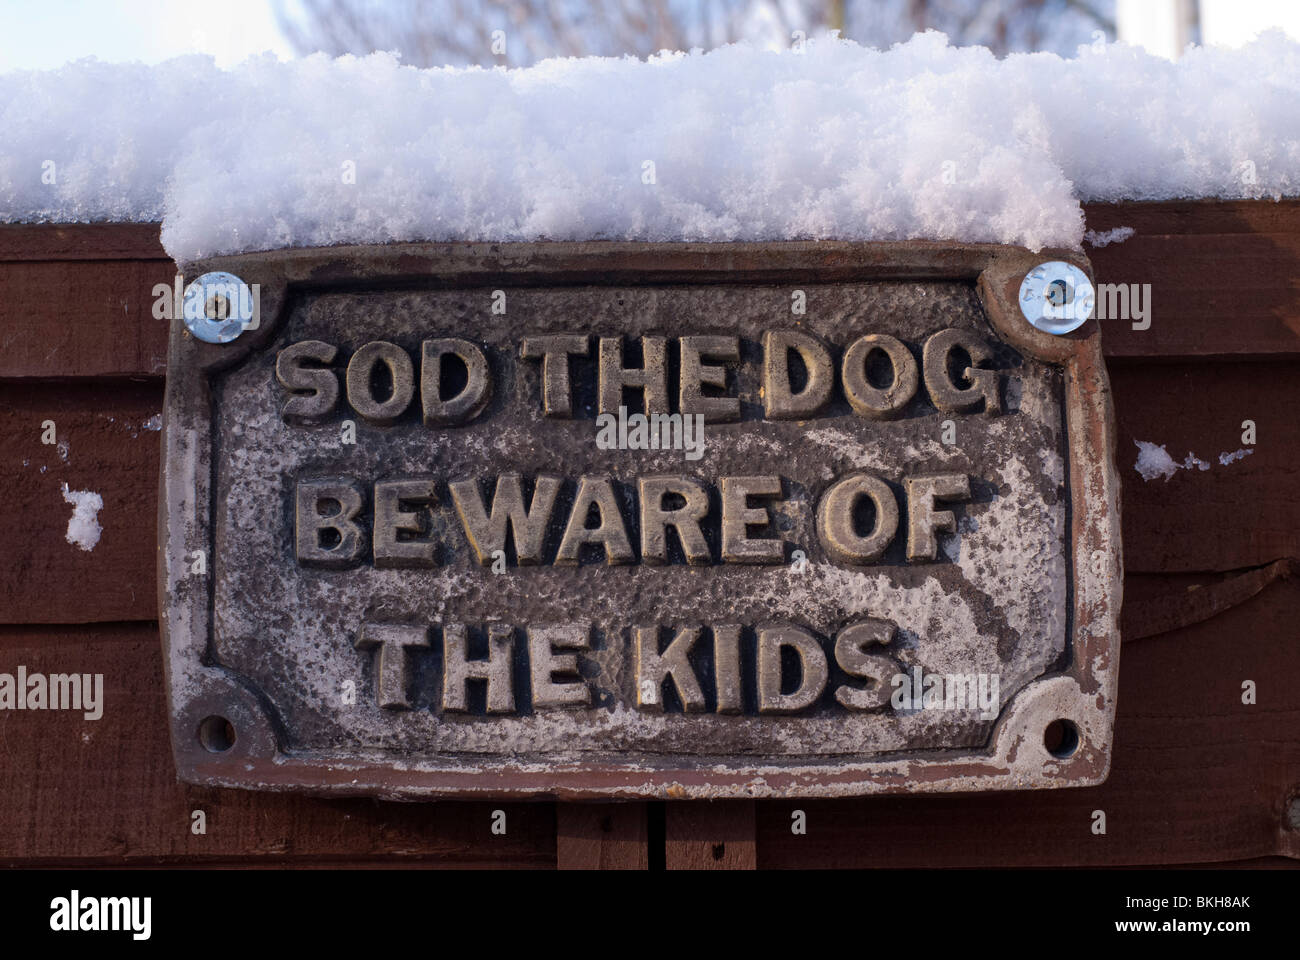 Beware of the Dog Sign - 2010 Stock Photo